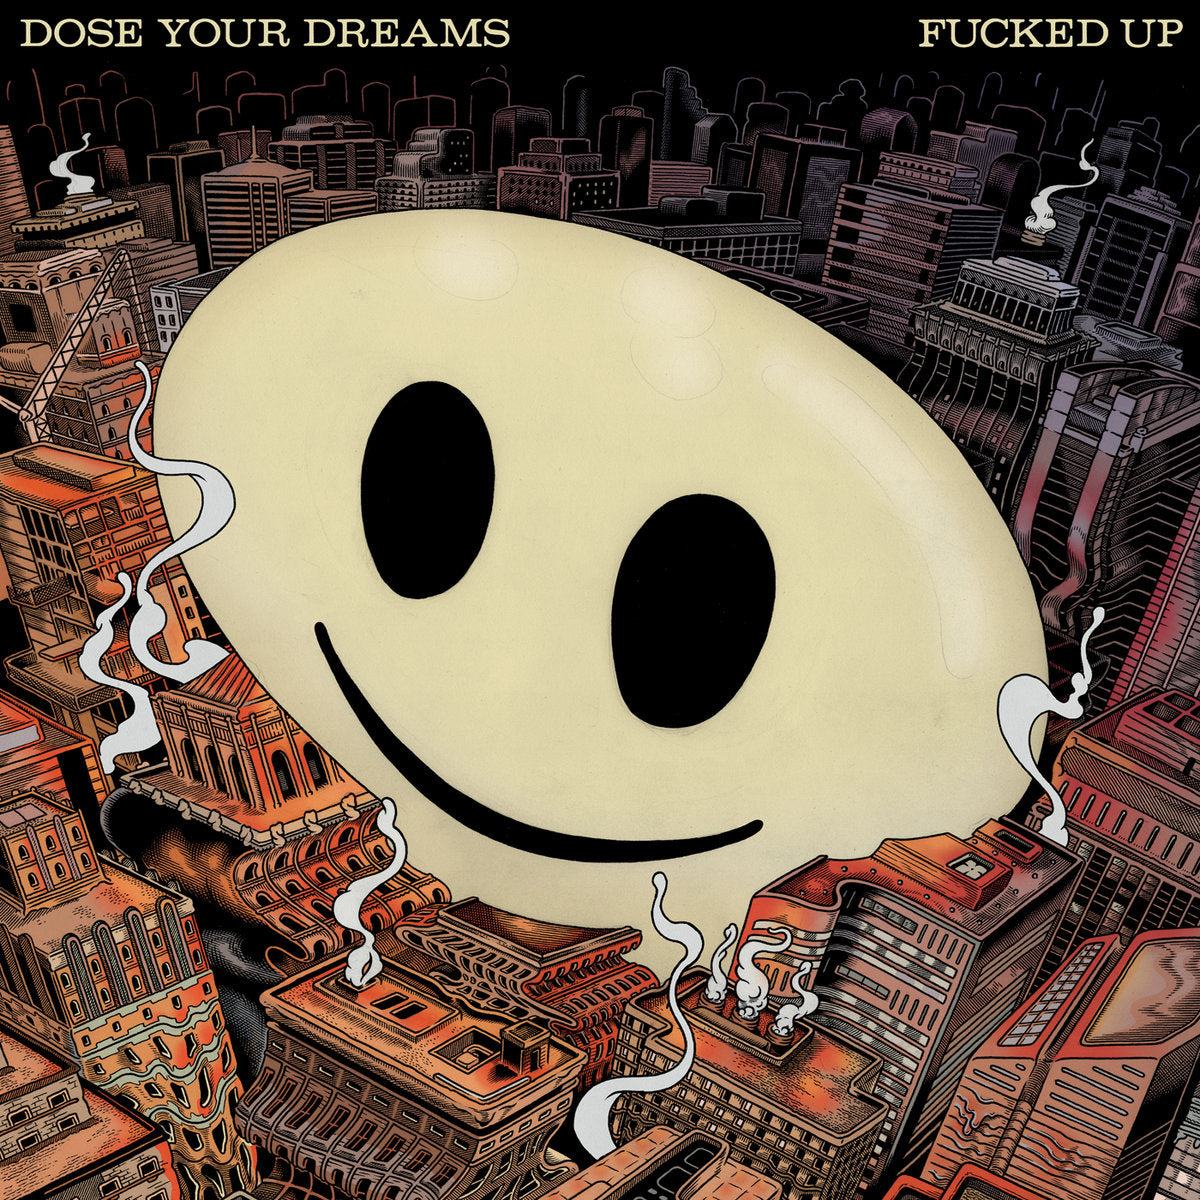 Fucked Up "Dose Your Dreams" 2xCD